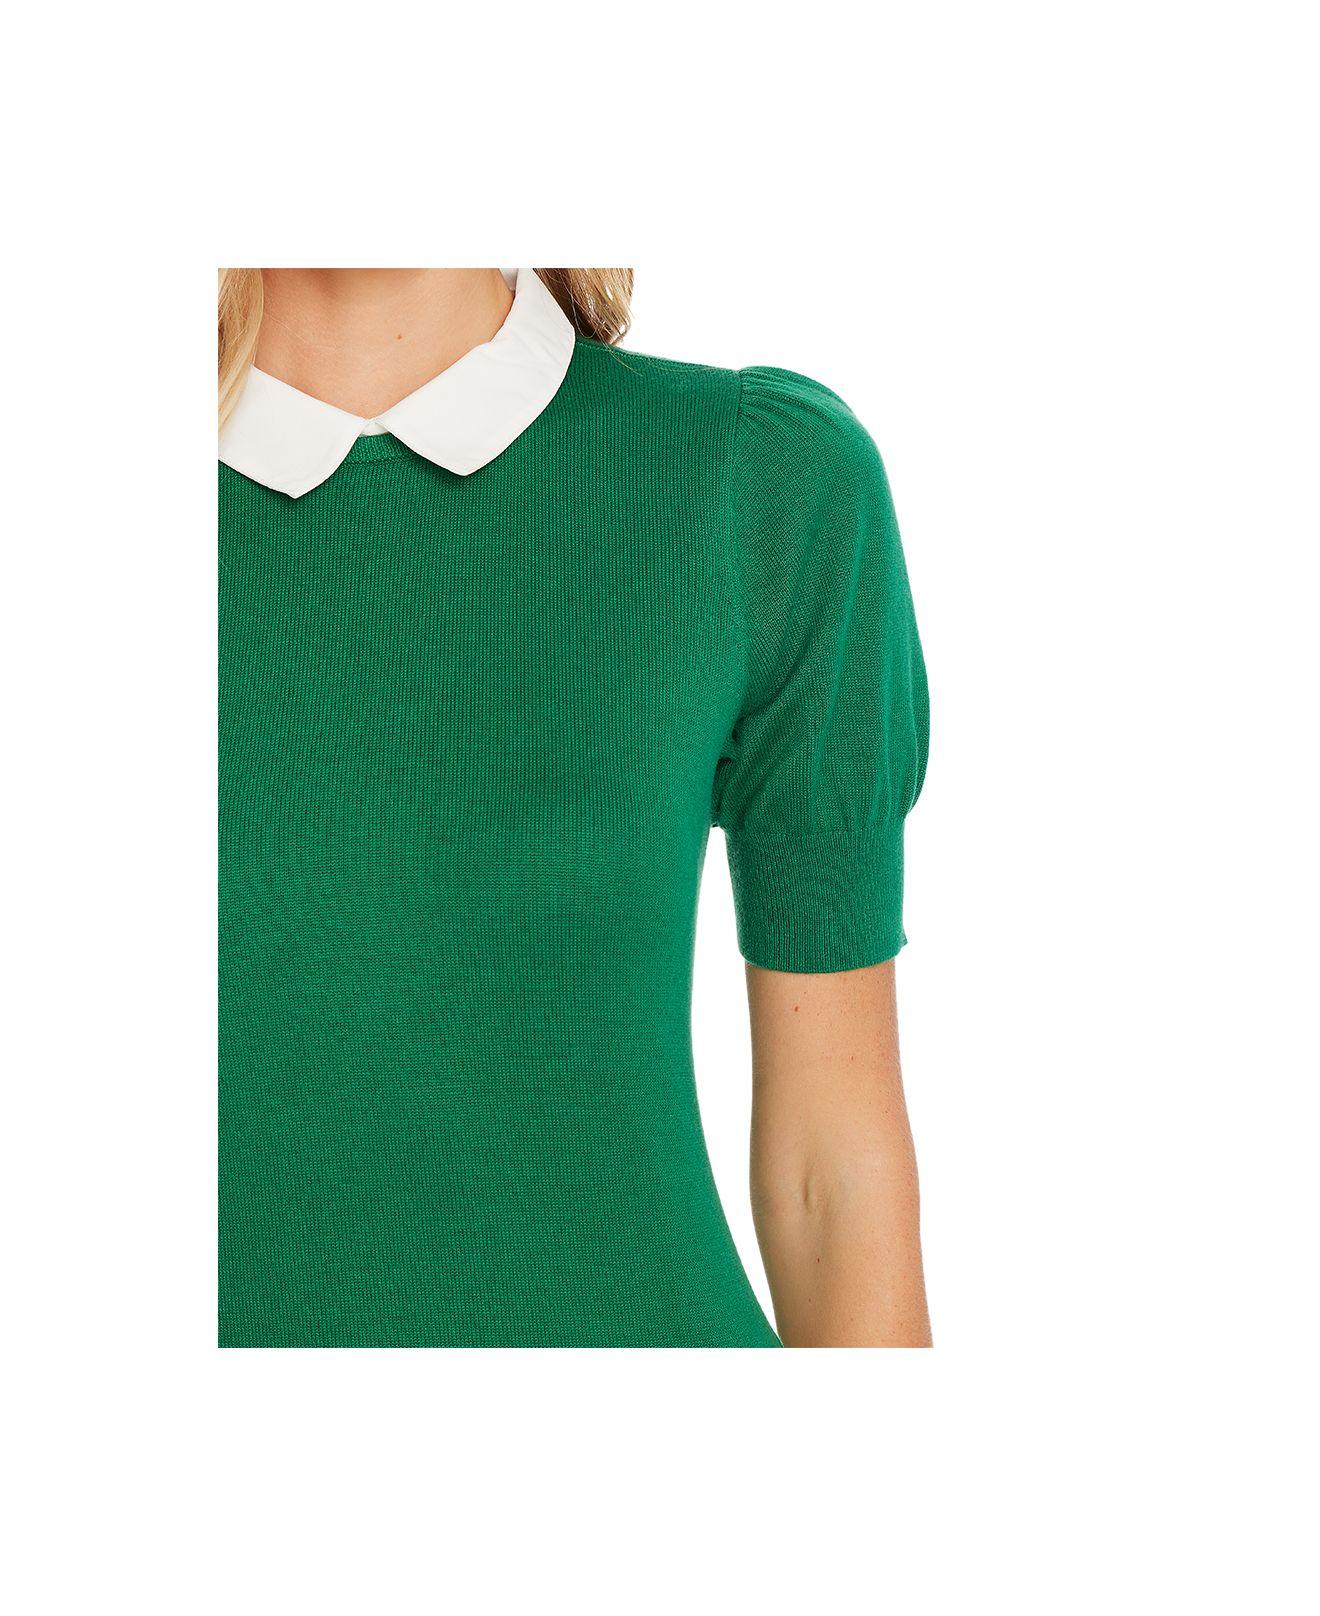 Cece Short Sleeve Sweater With Contrast Collar in Green | Lyst